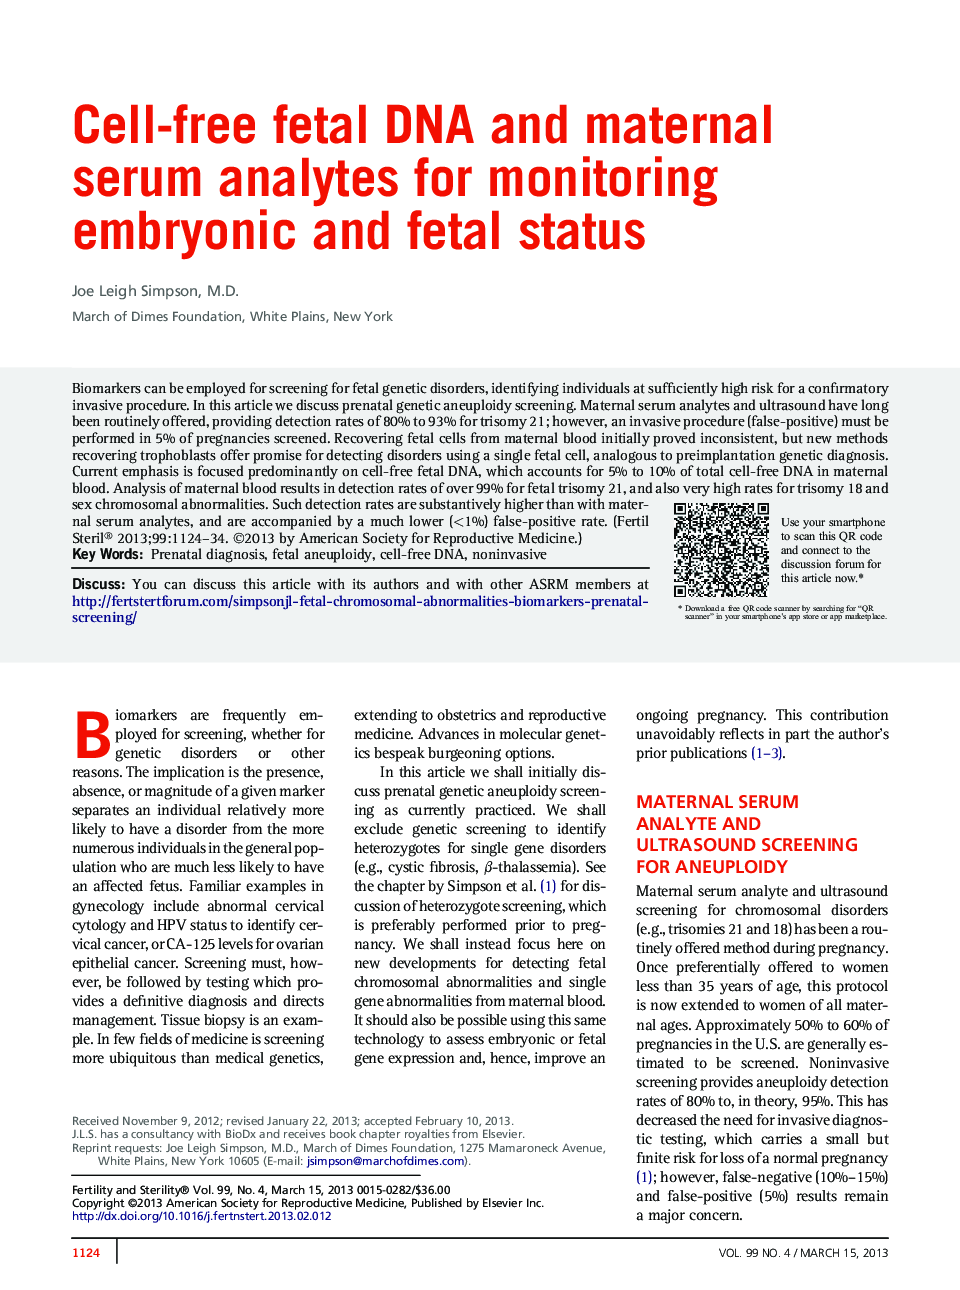 Cell-free fetal DNA and maternal serum analytes for monitoring embryonic and fetal status 